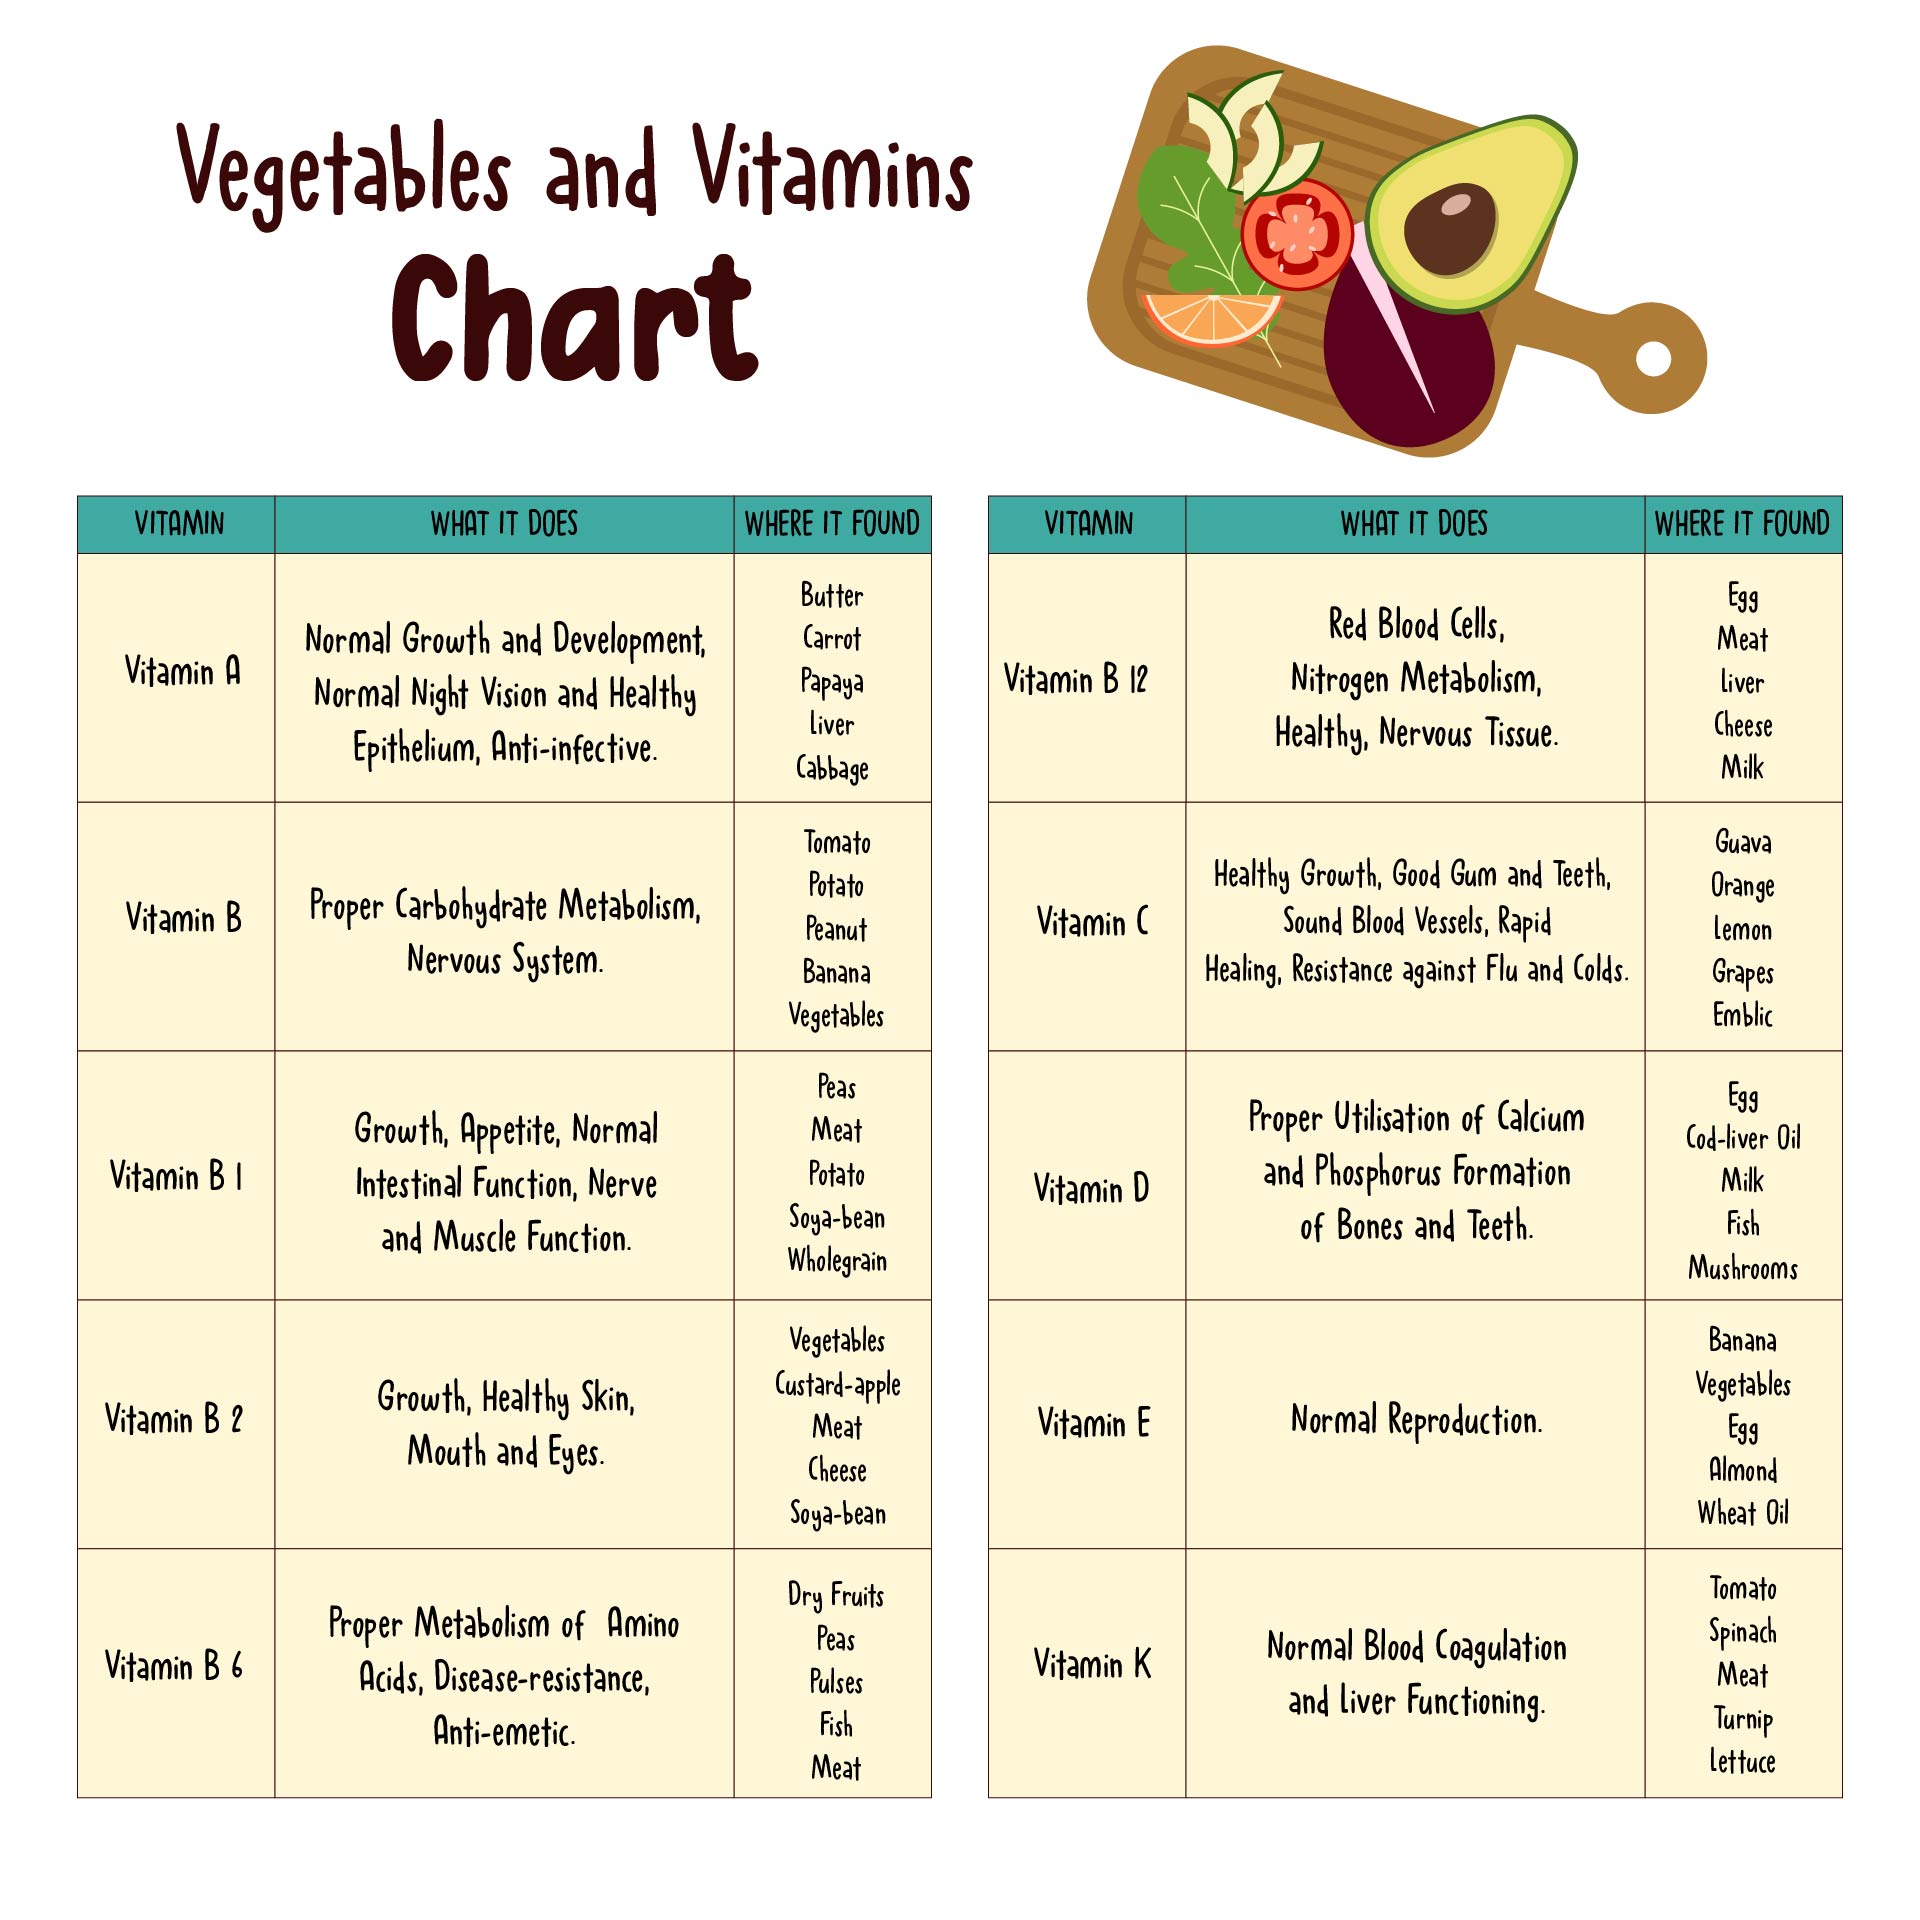 Vegetables and Vitamins Chart